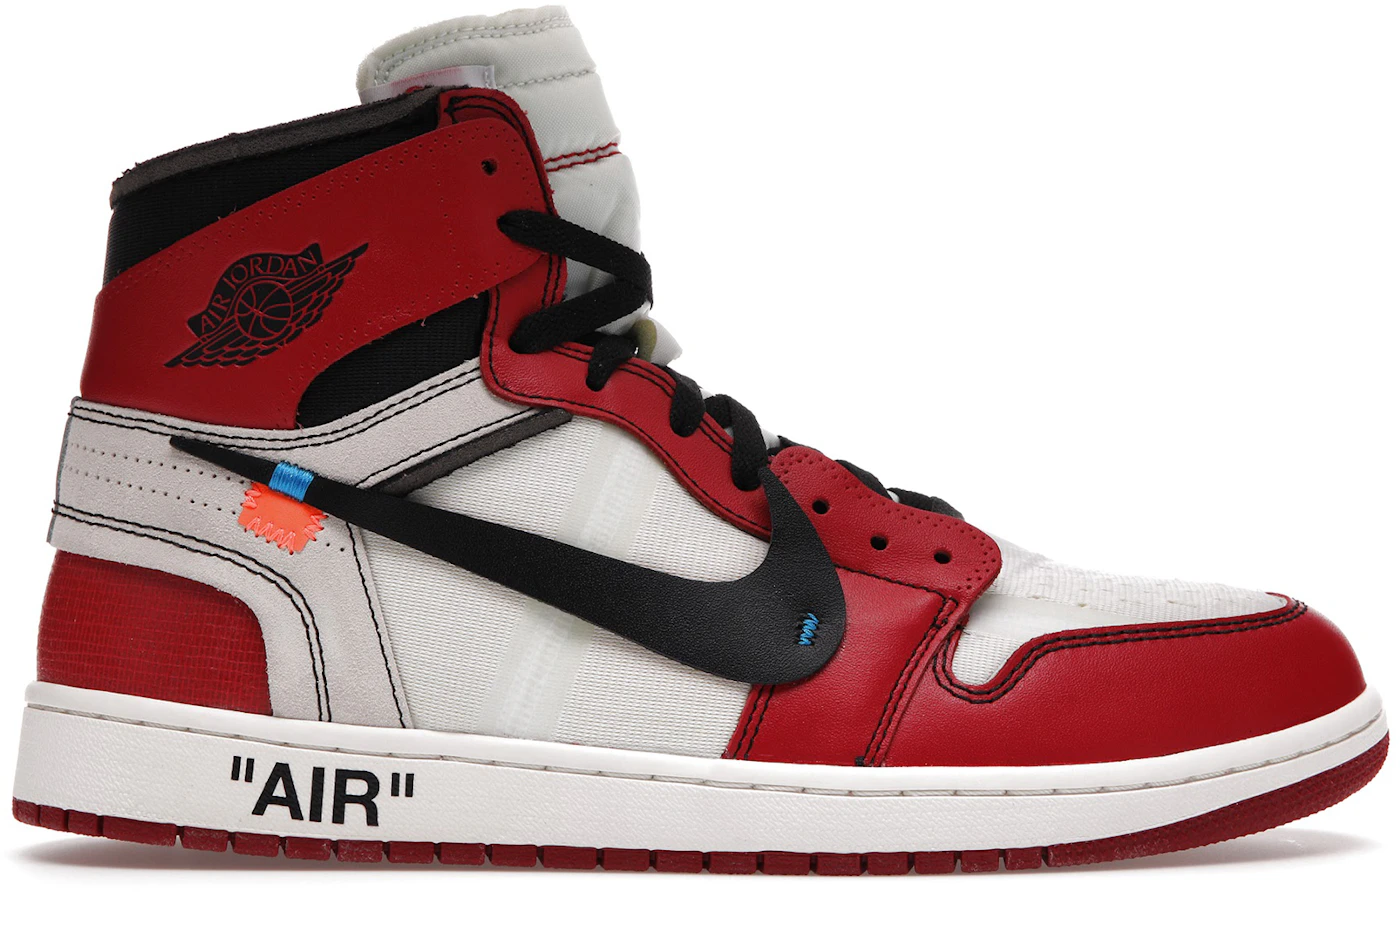 Nike x Virgil Abloh: See The Ten De- and Reconstructed Sneakers